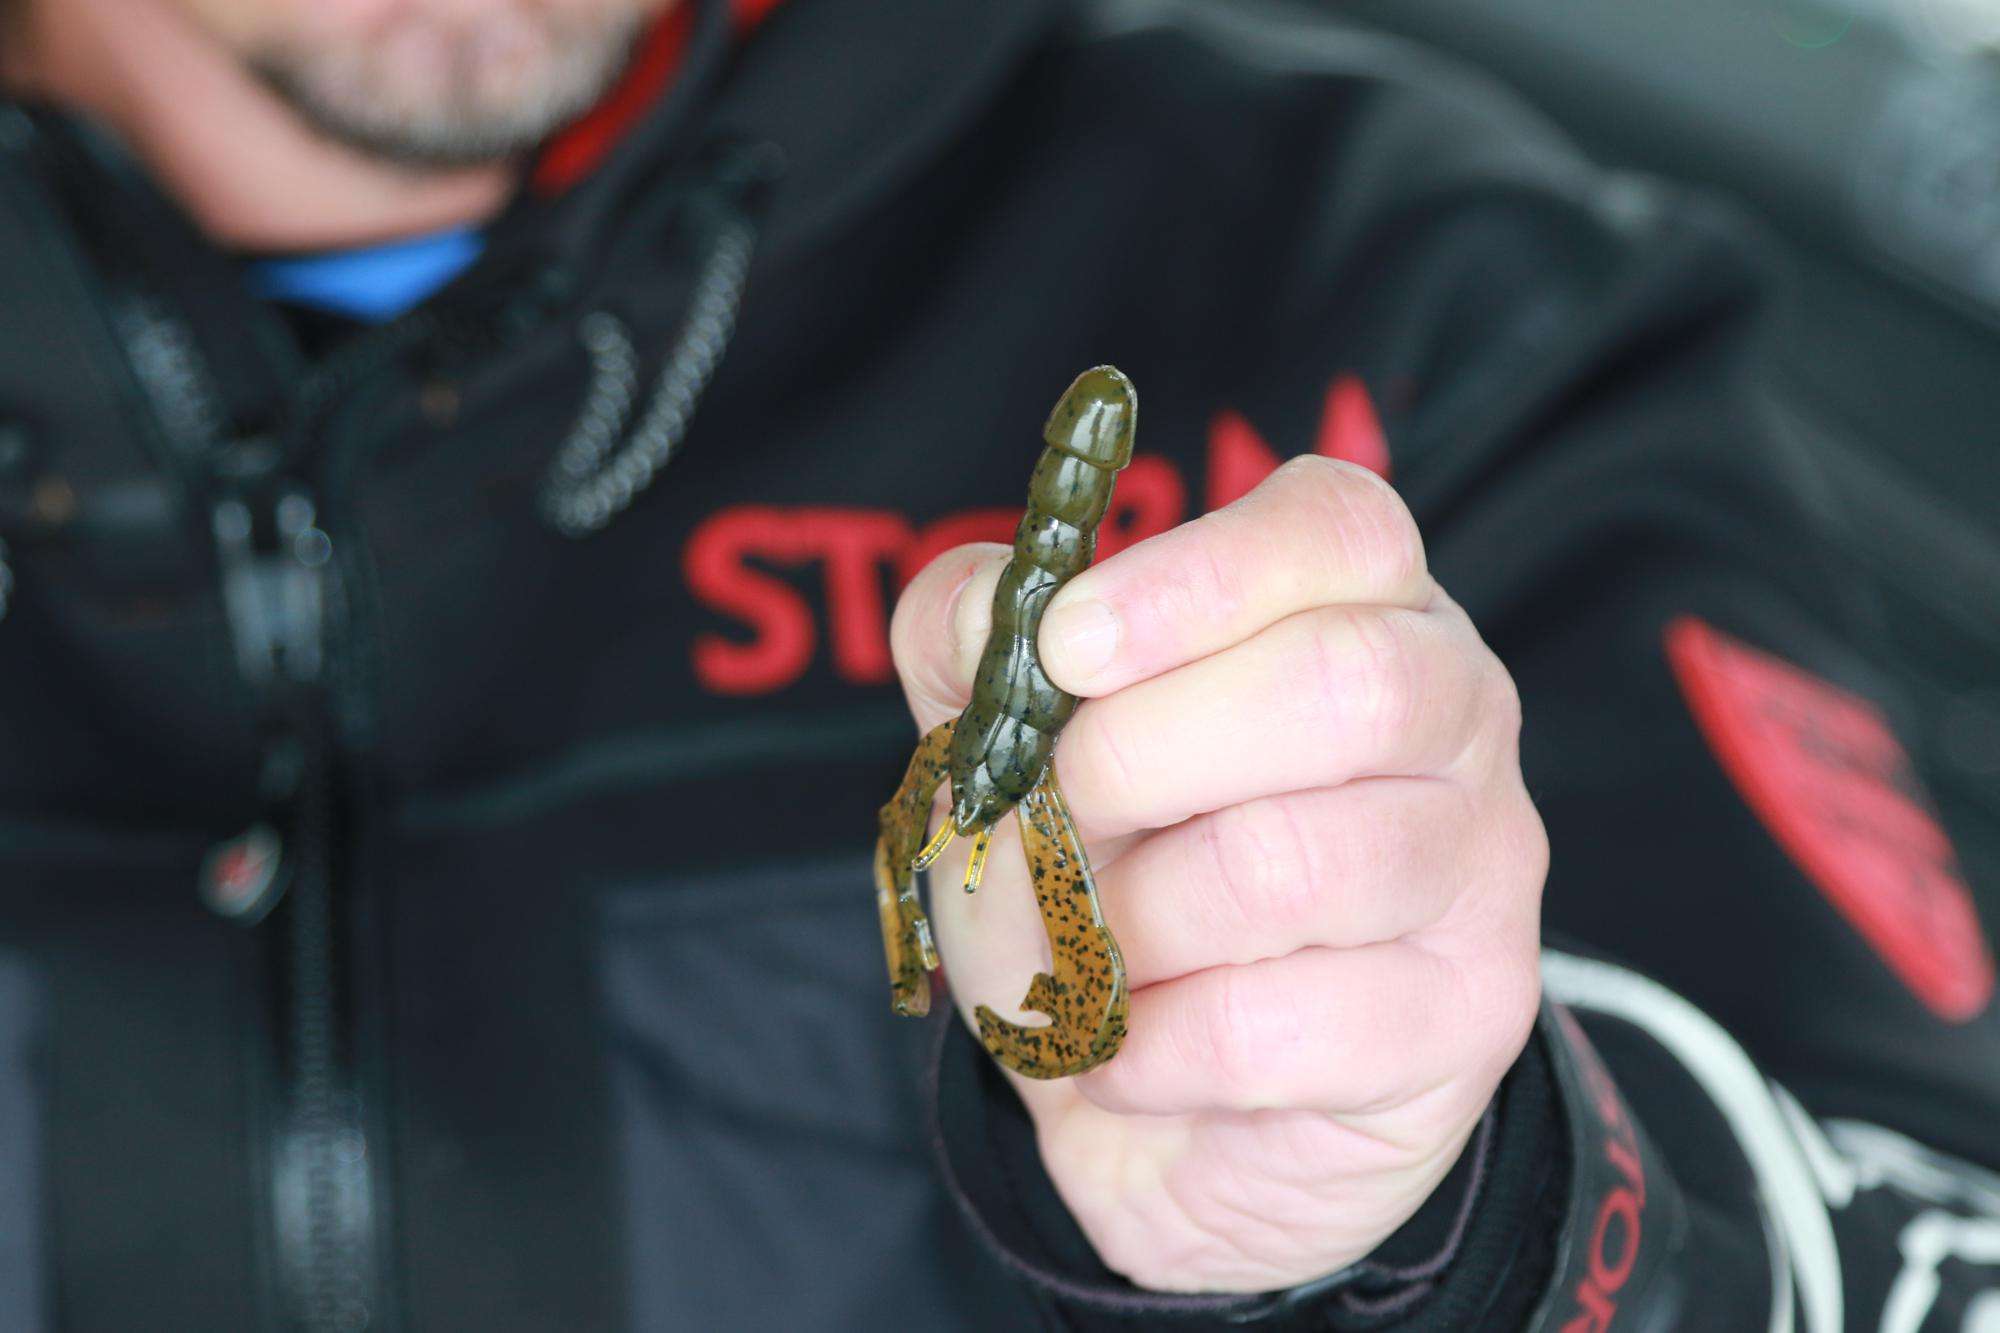 Across the board, he relies on the Rage Craw profile for the majority of his jig work.